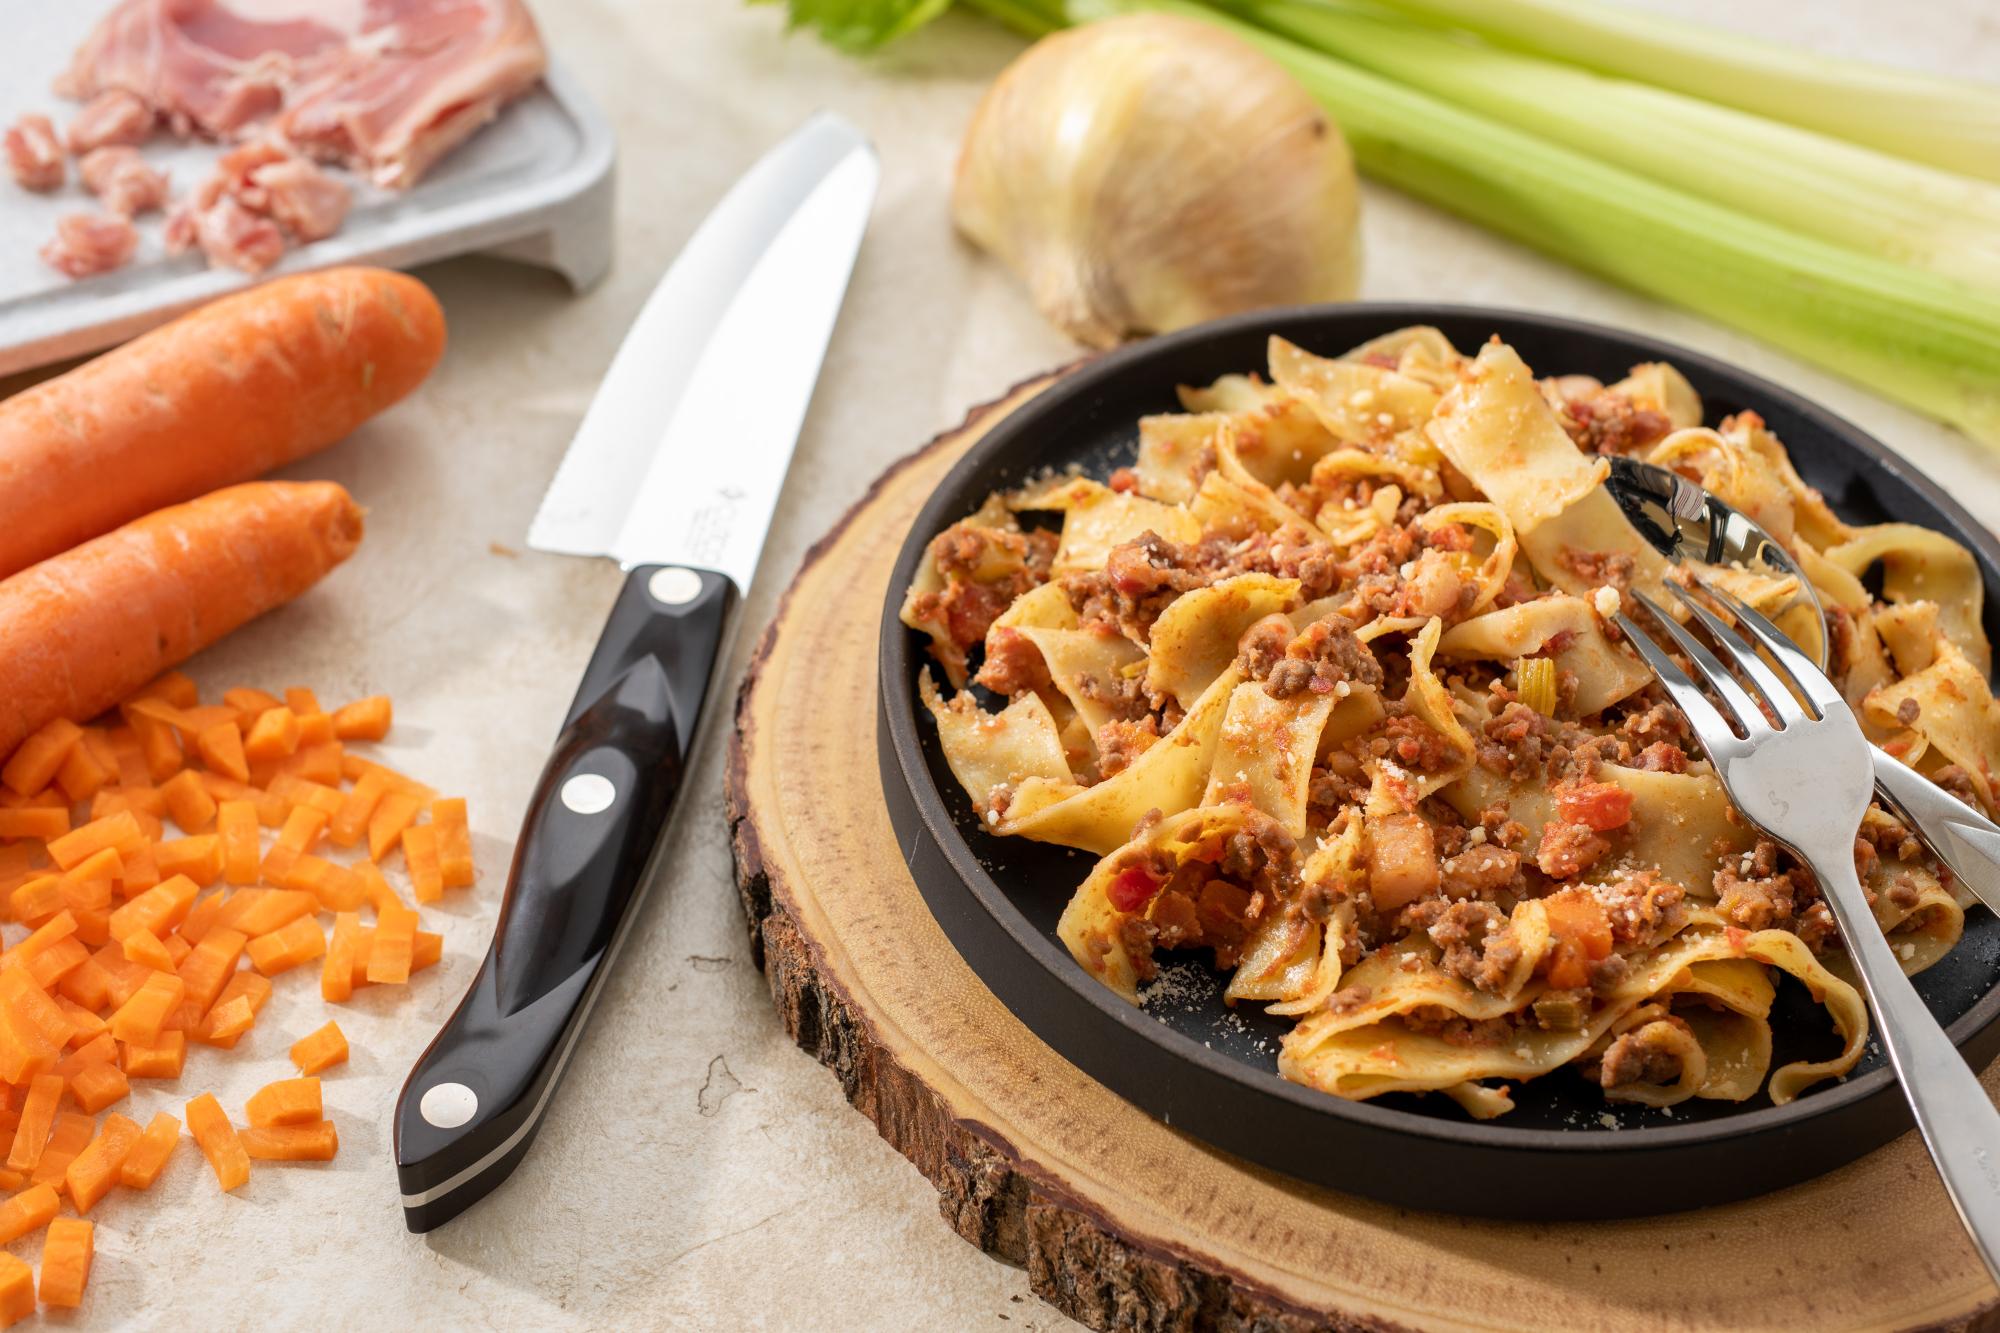 Italian Bolognese Sauce With Pancetta and Papperdelle